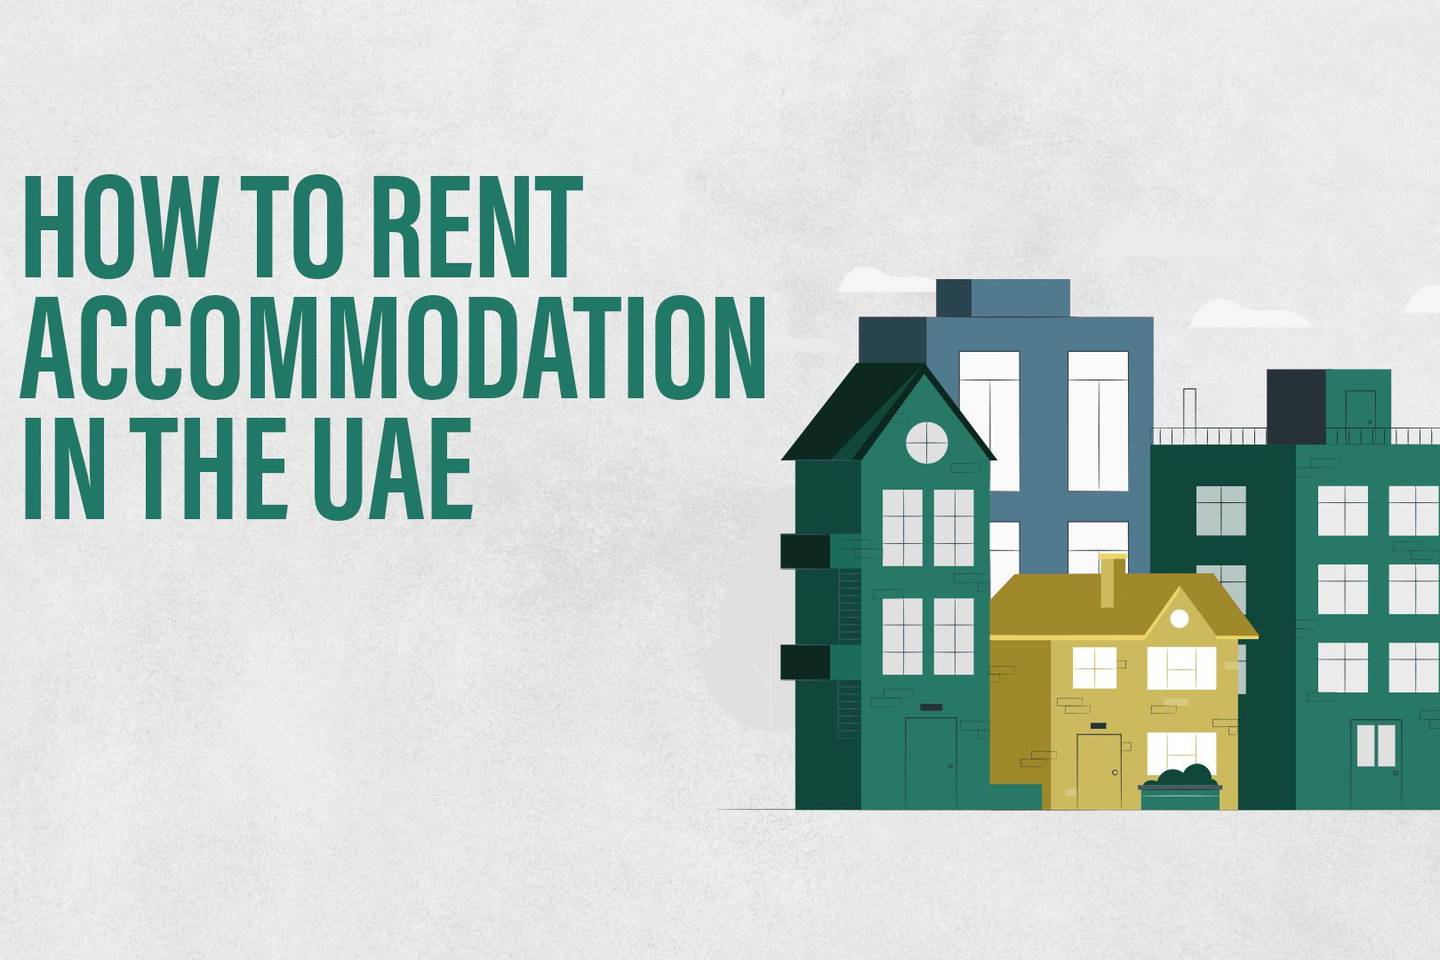 How to rent accommodation in the UAE